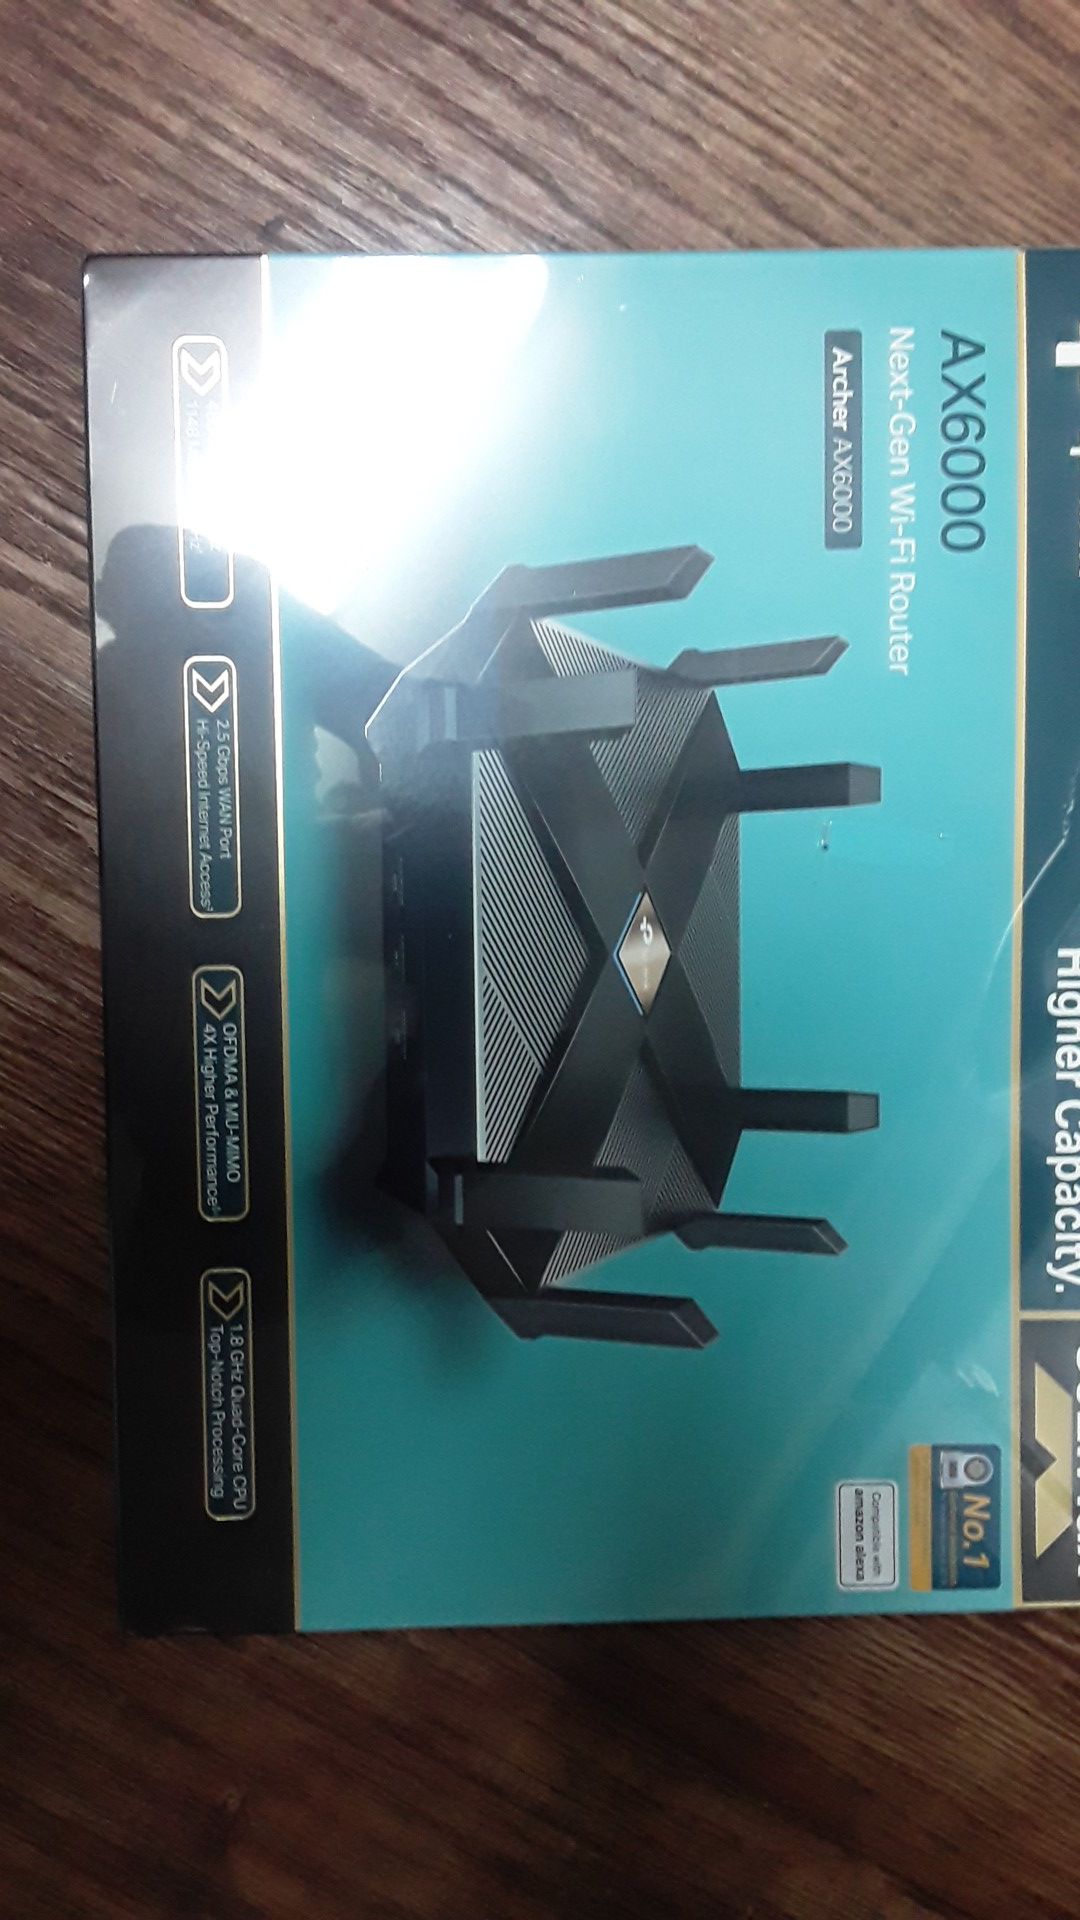 AX6000 Wi-Fi Router